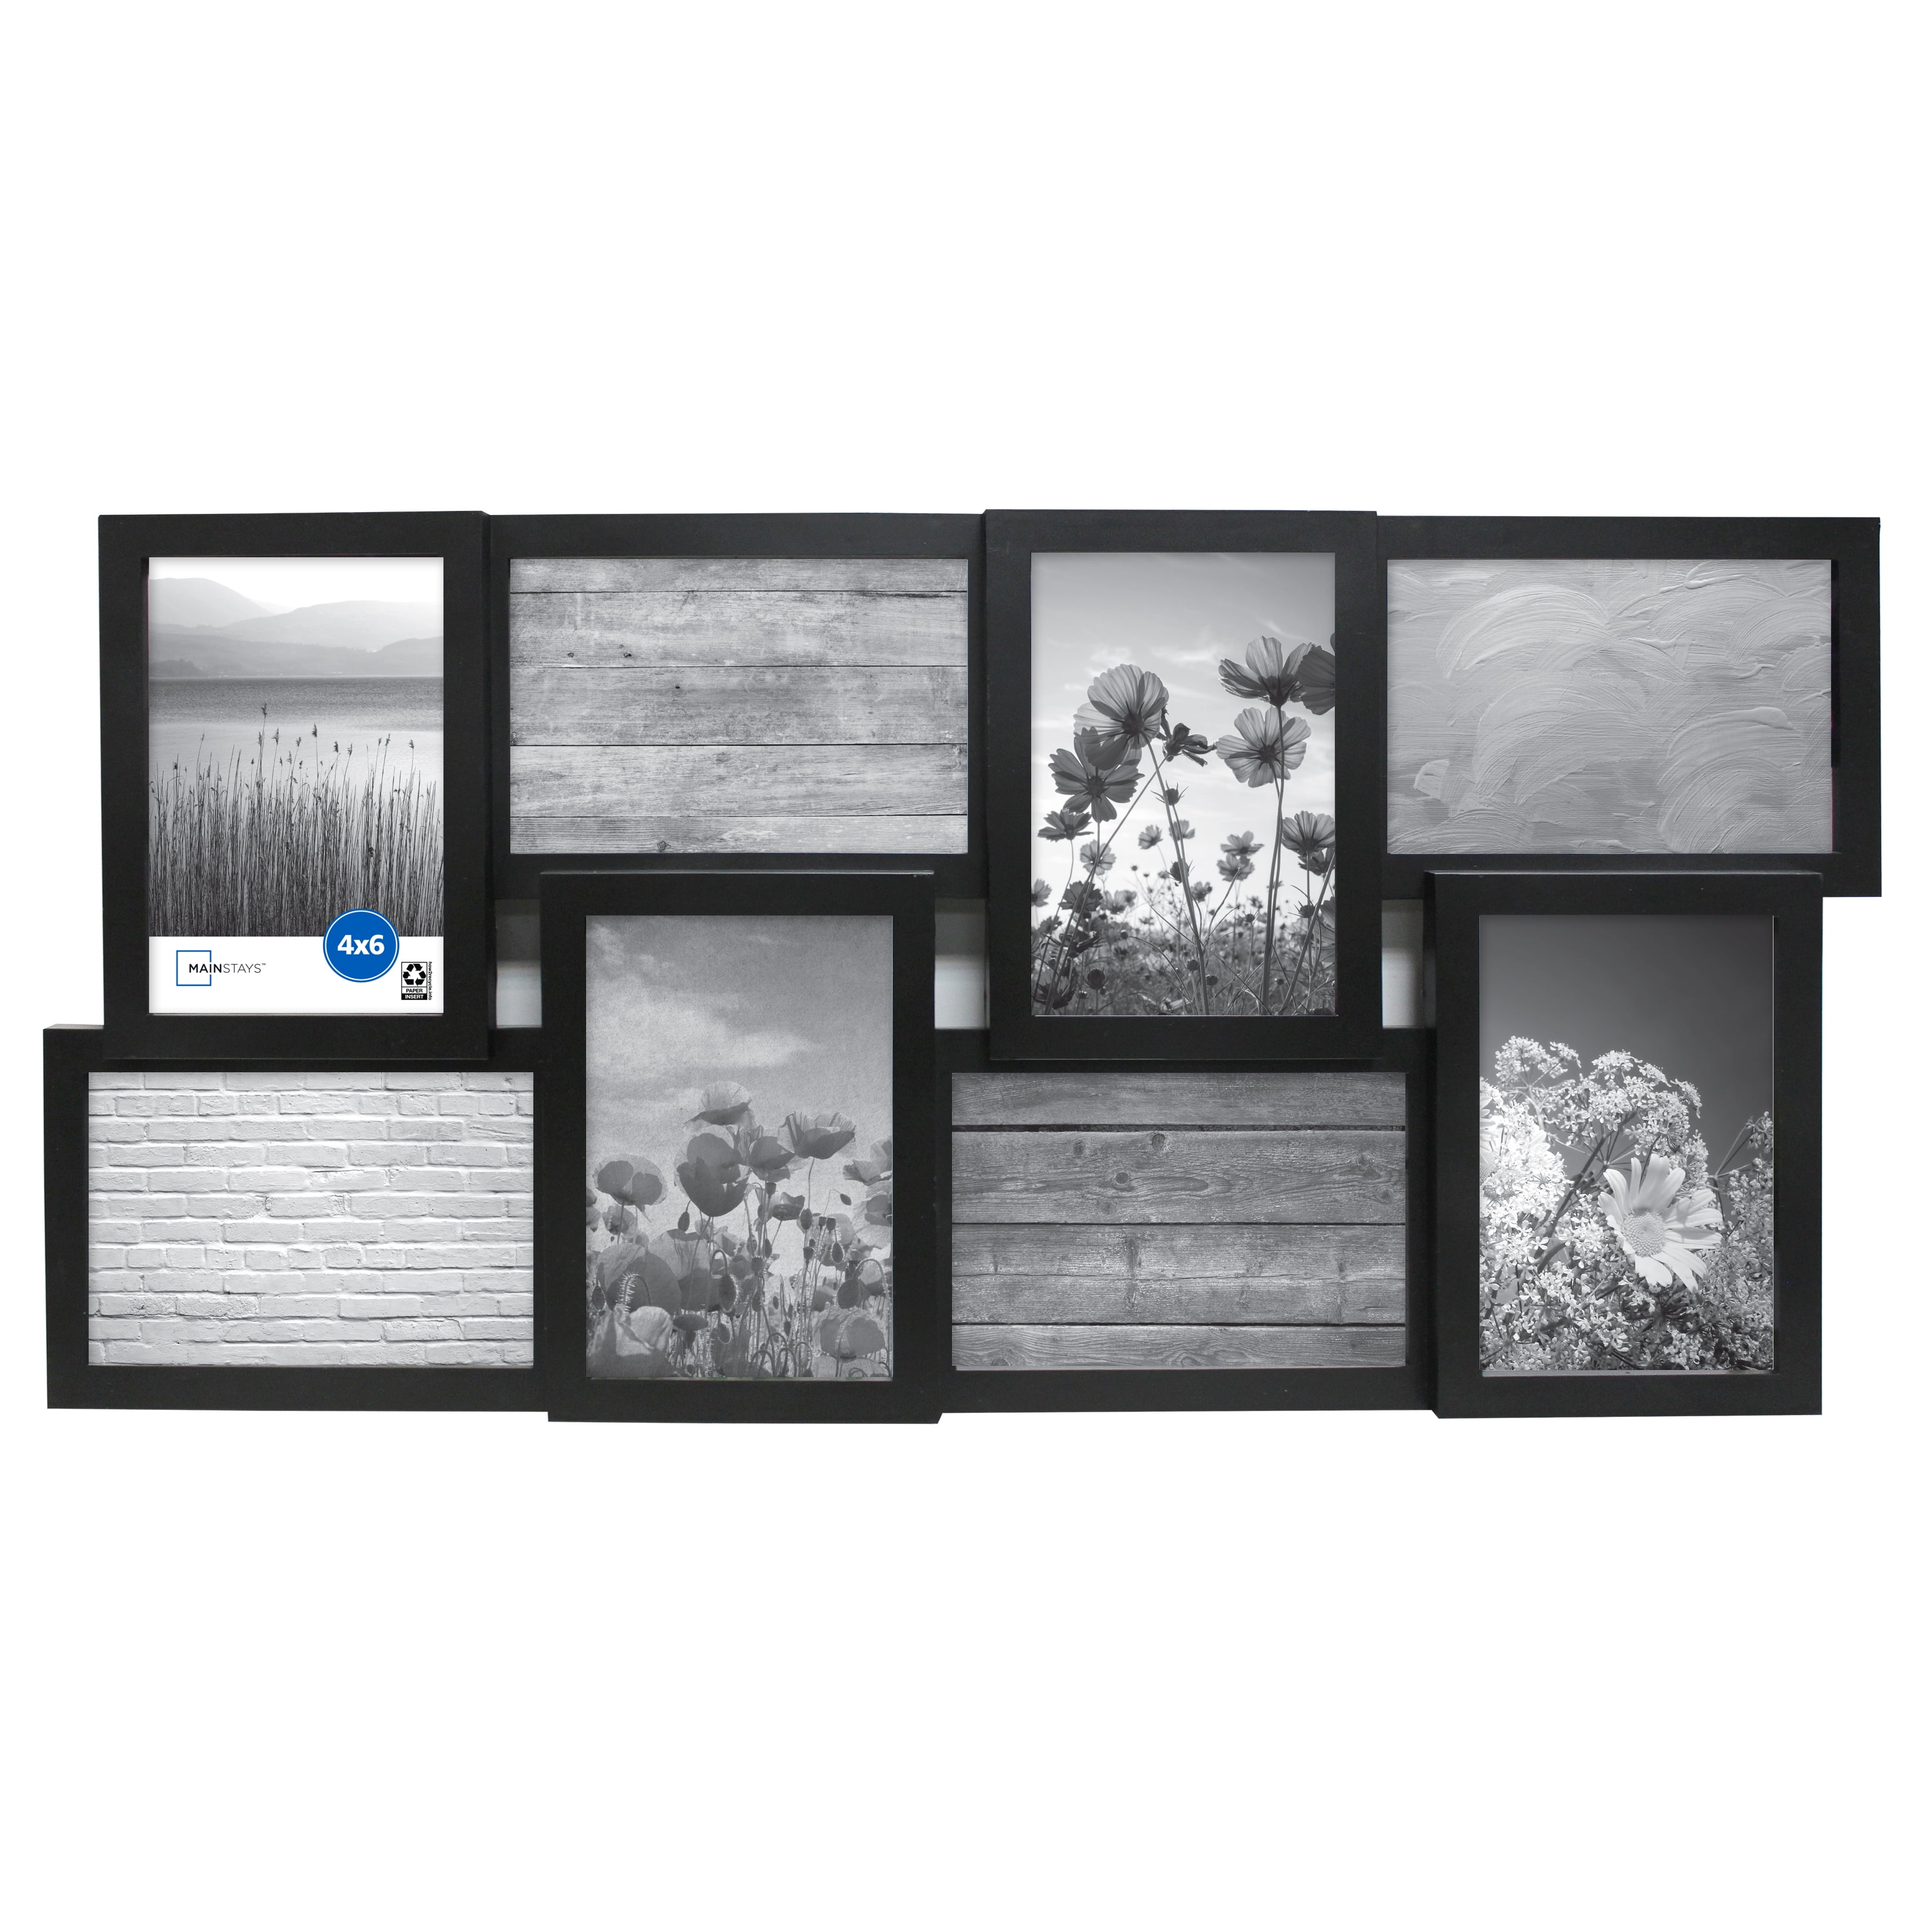 PACK OF 5 PHOTO PICTURE MOUNTS 8 X 6 INCH FOR 6 X 4 PRINT CHOICE OF COLOUR 